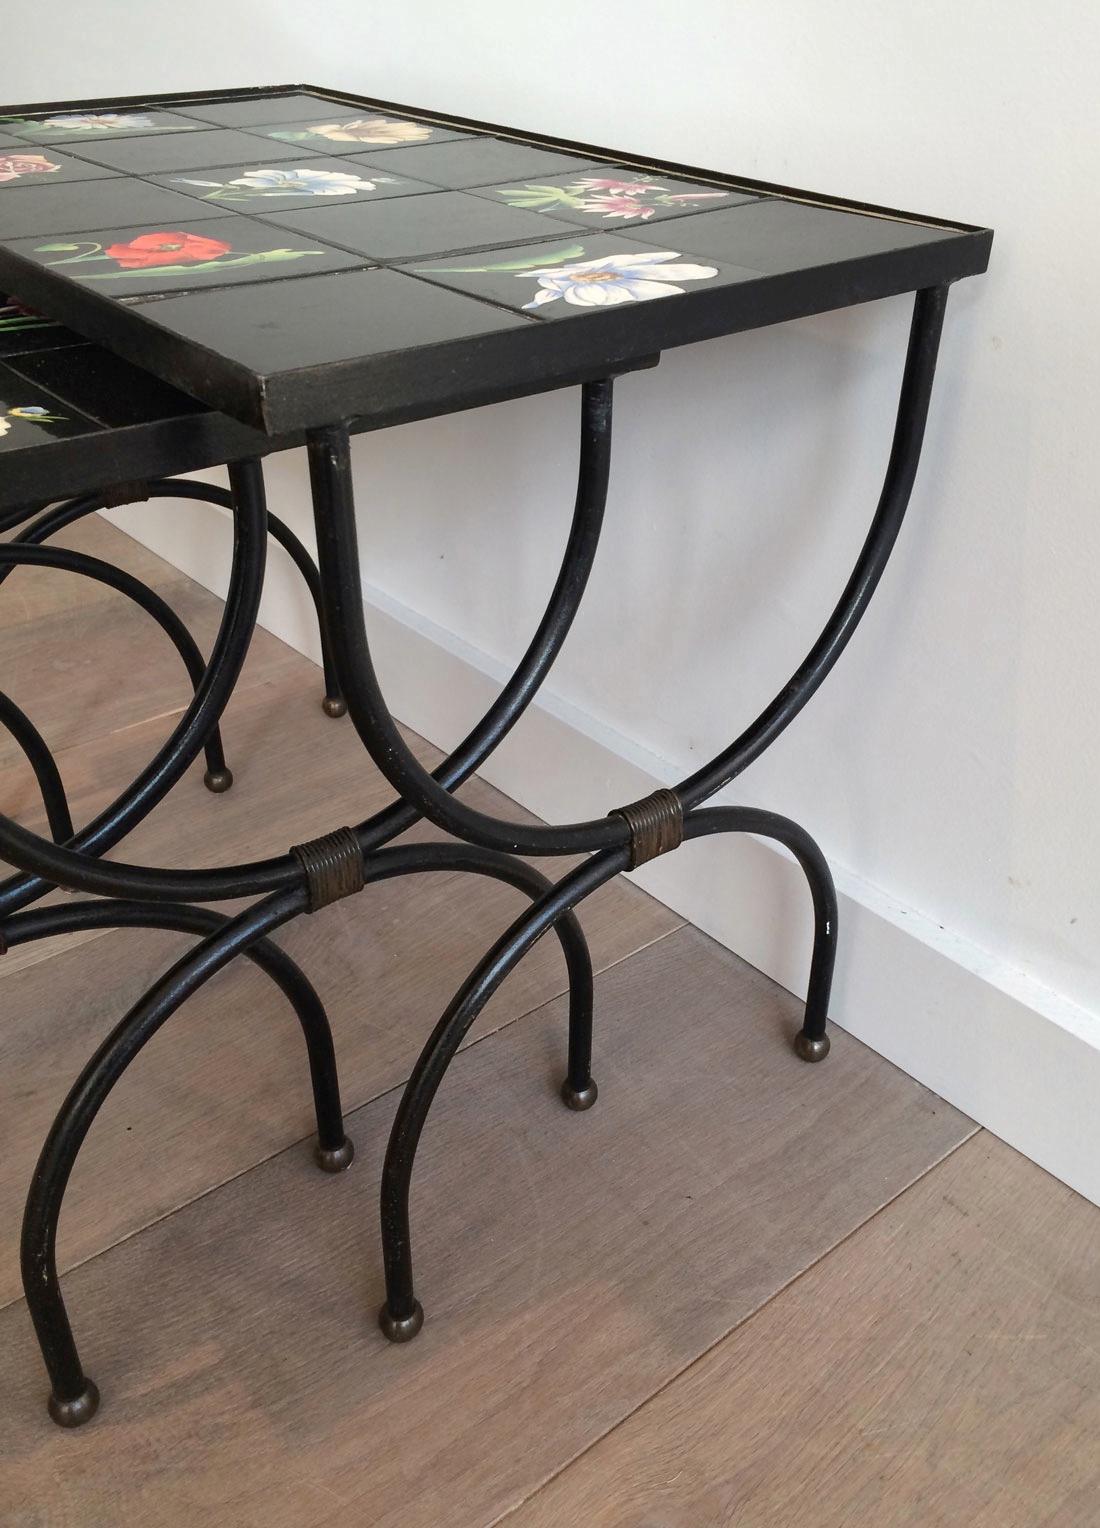 Unusual Ceramic and Black Iron Nesting Tables, French Work, circa 1950 For Sale 2